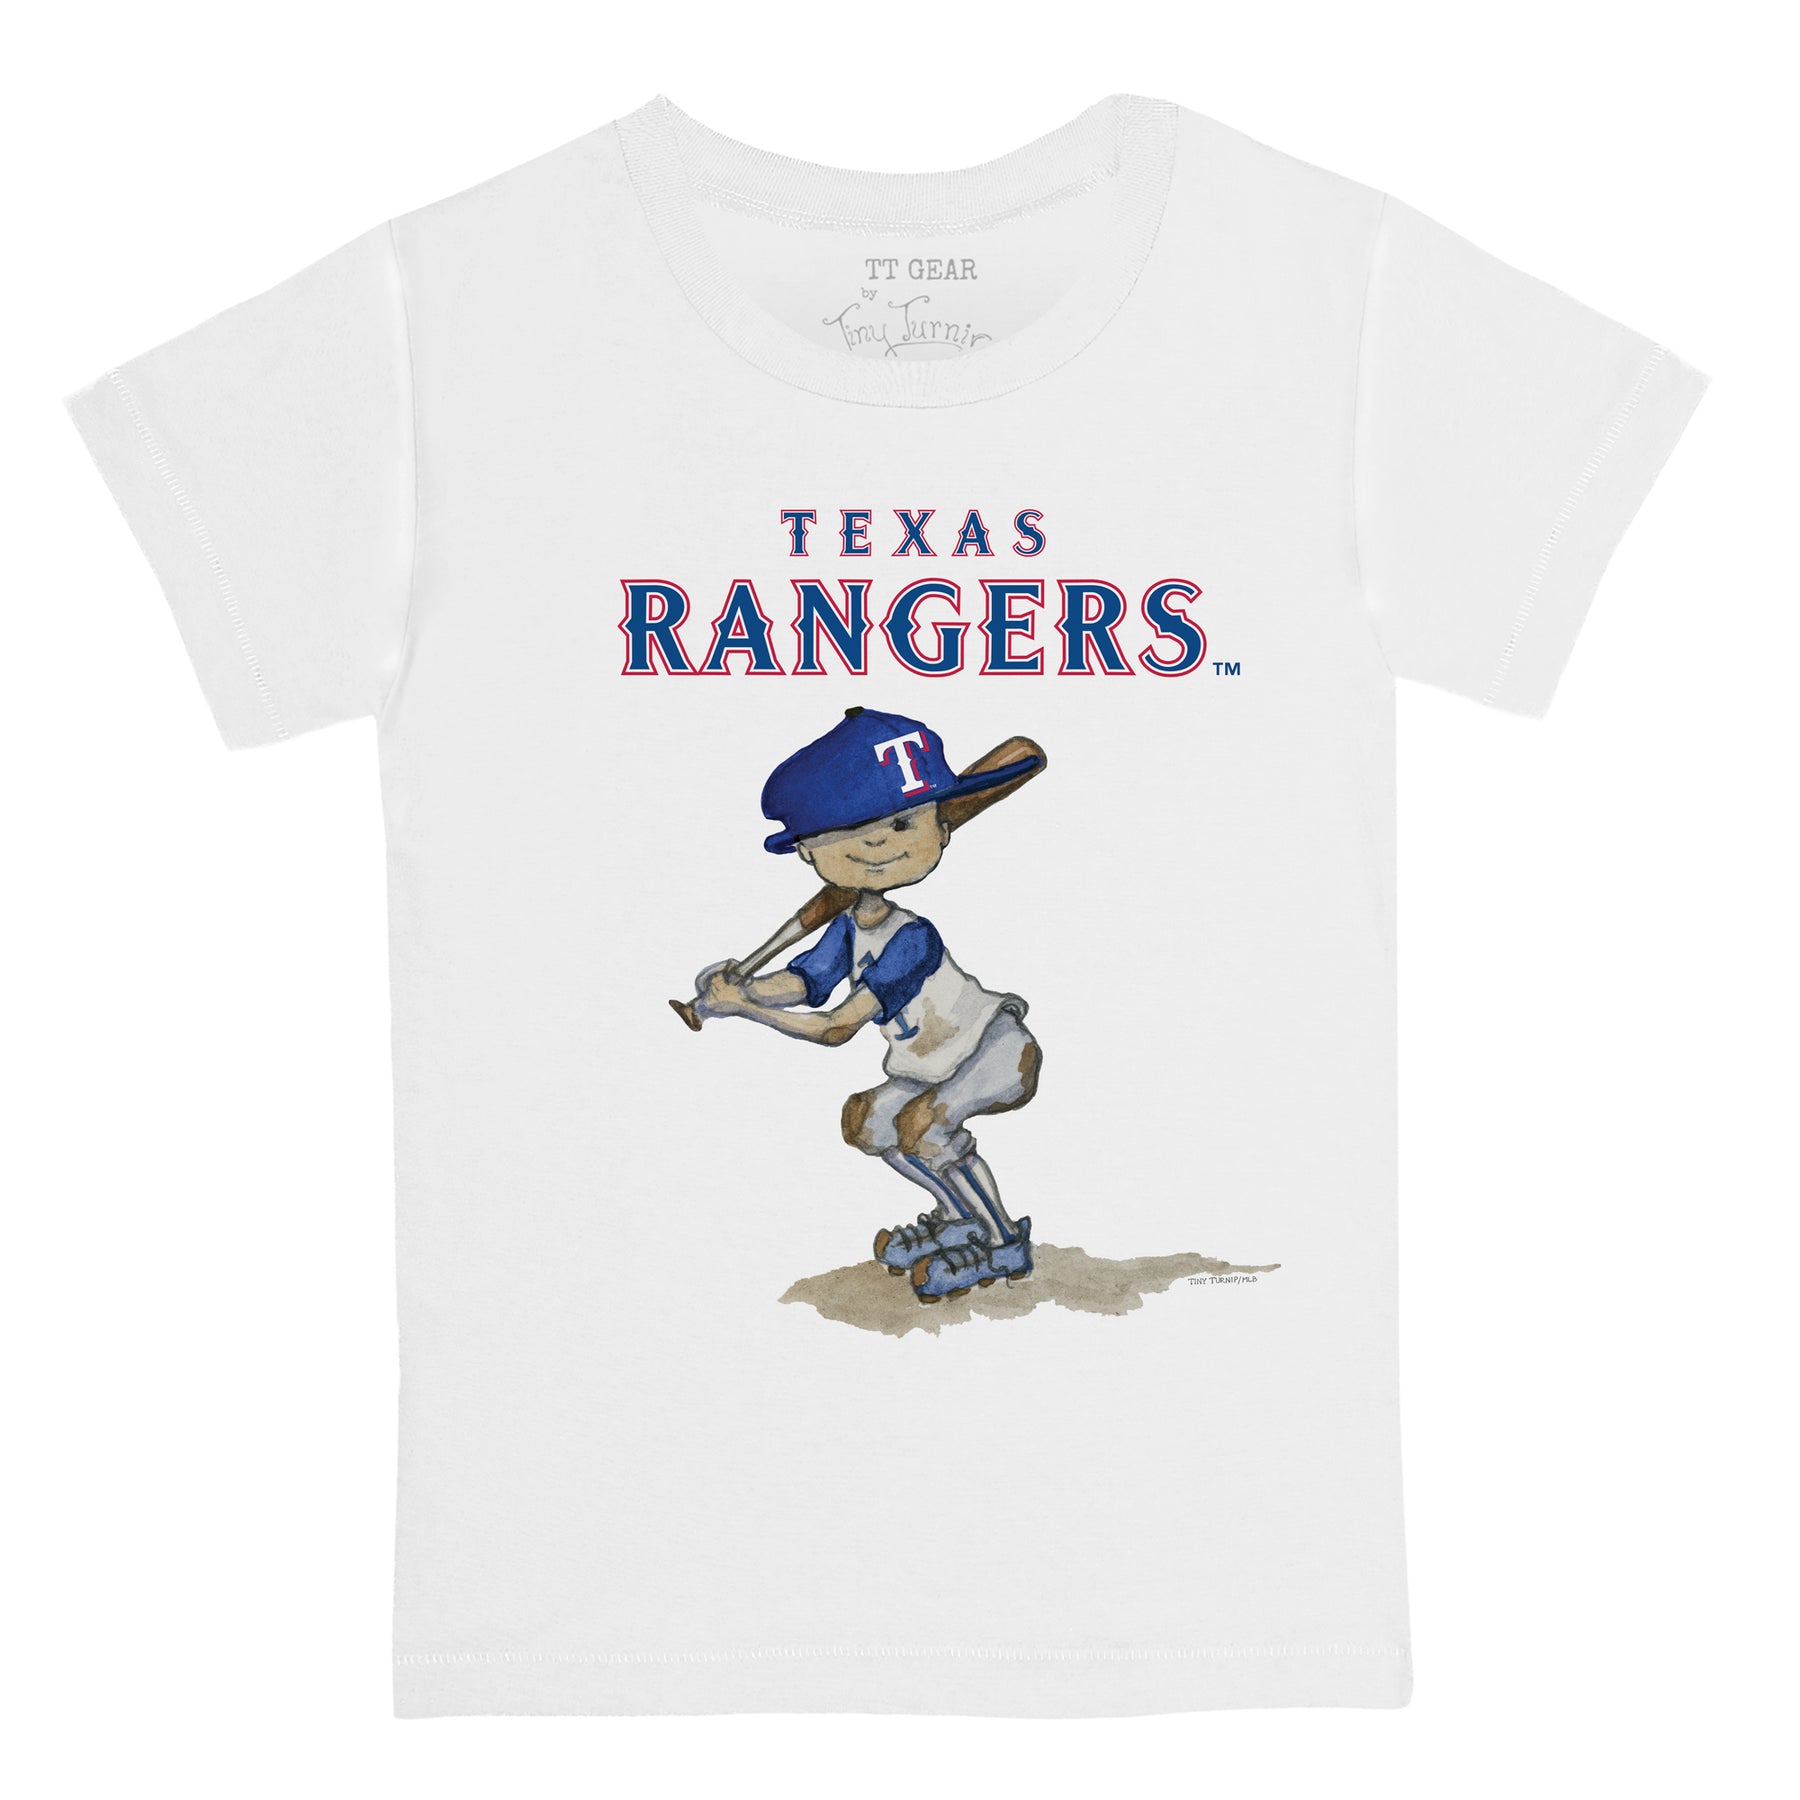 Texas Rangers Size 3XL MLB Shirts for sale